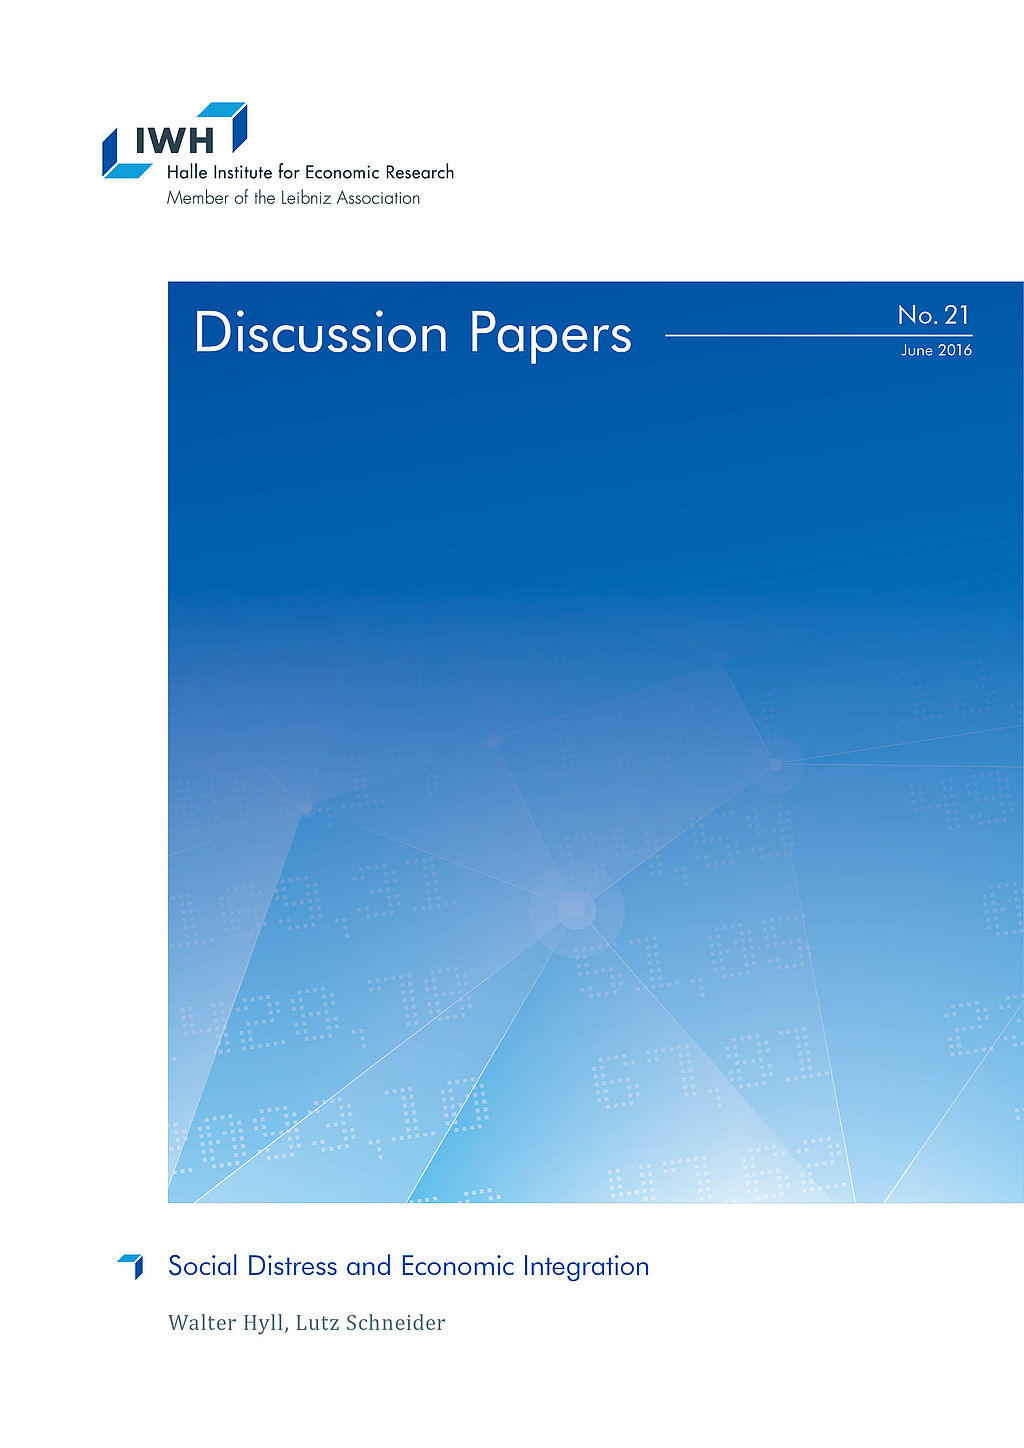 Cover_IWH-Discussion-Papers_2016.jpg